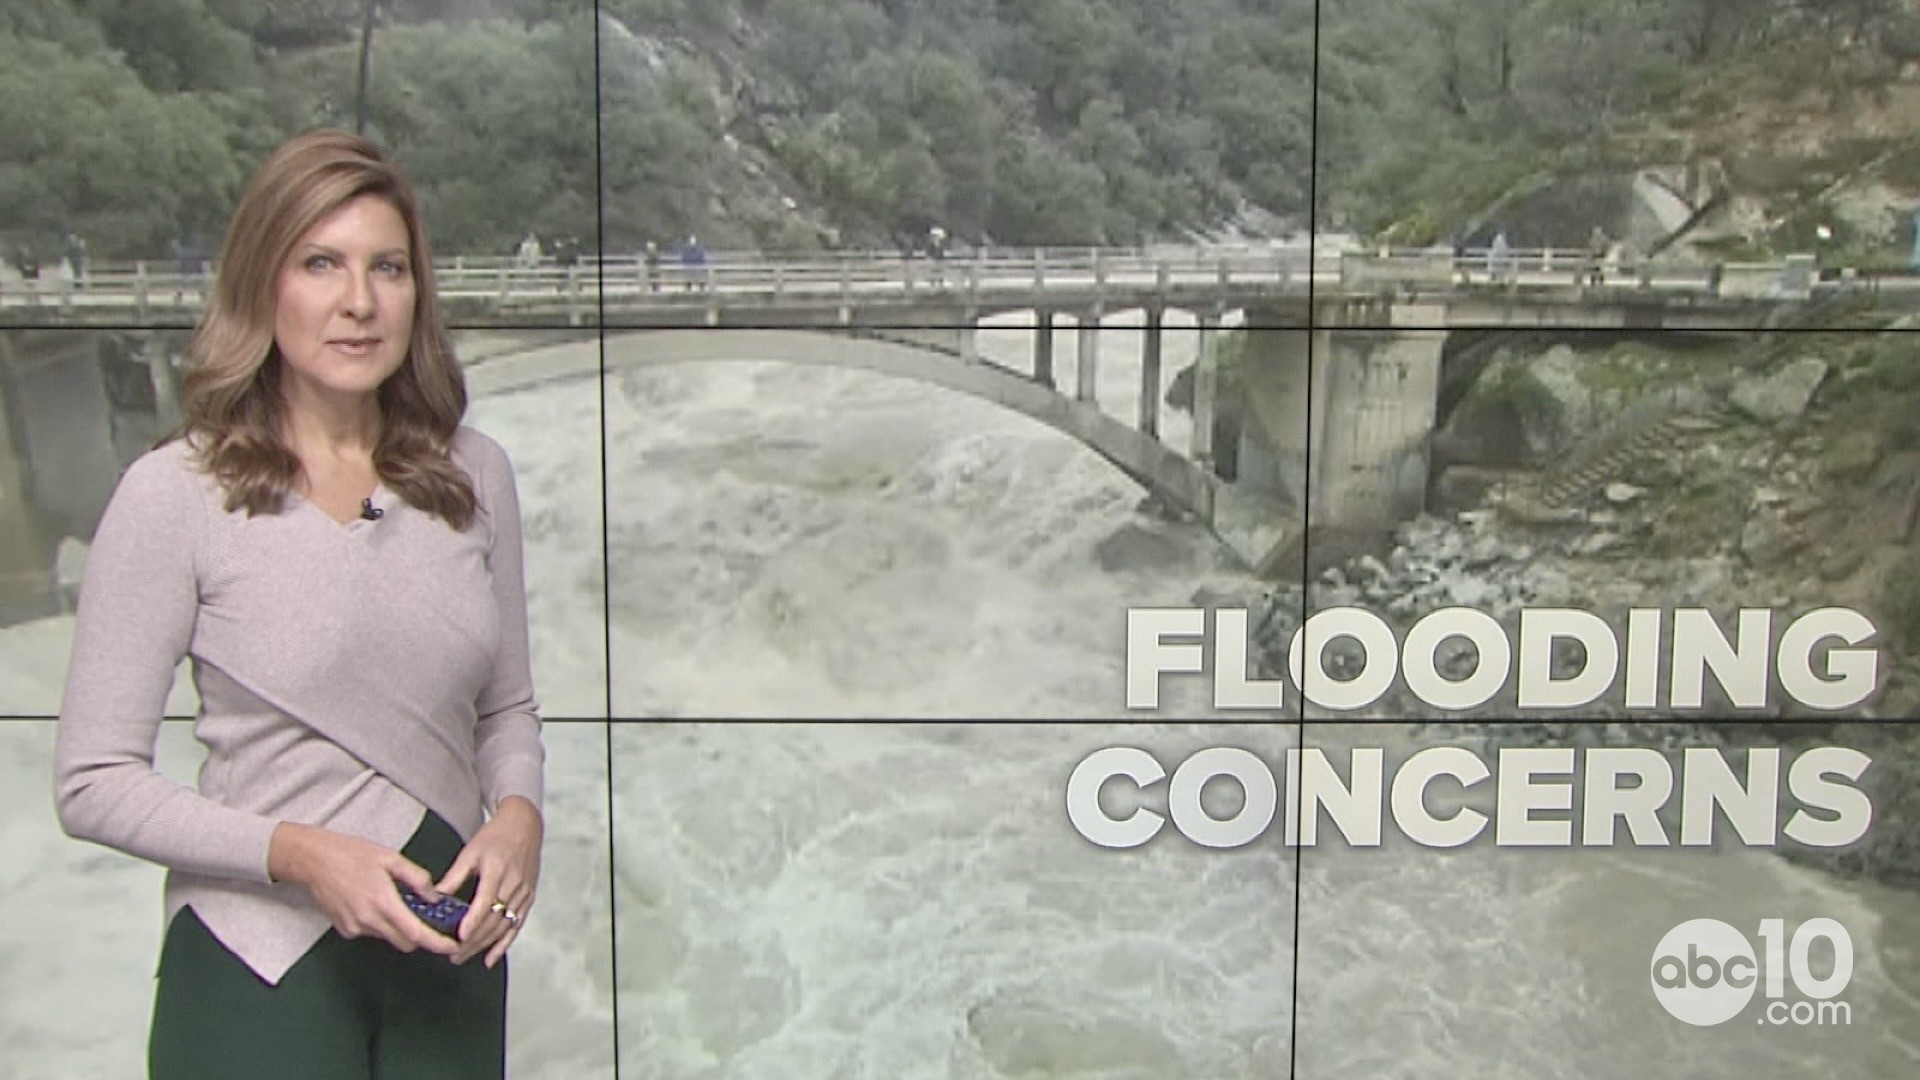 Two more storms hitting California bring increased risk for flooding for rivers, creeks, streams and flood-prone areas.